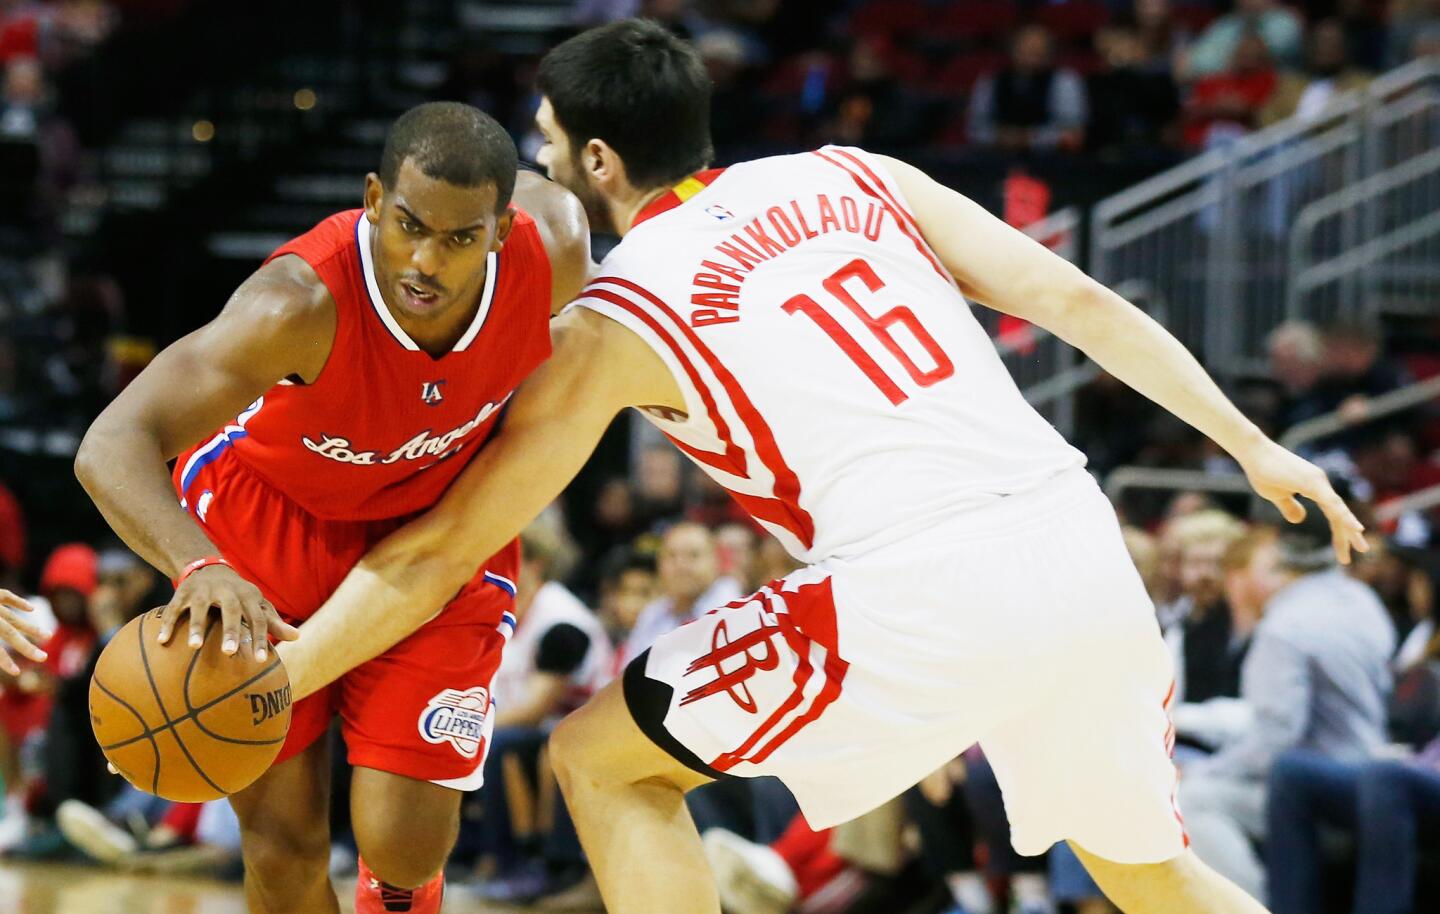 Clippers point guard Chris Paul drives past Rockets forward Kostas Papanikolaou in the second half.